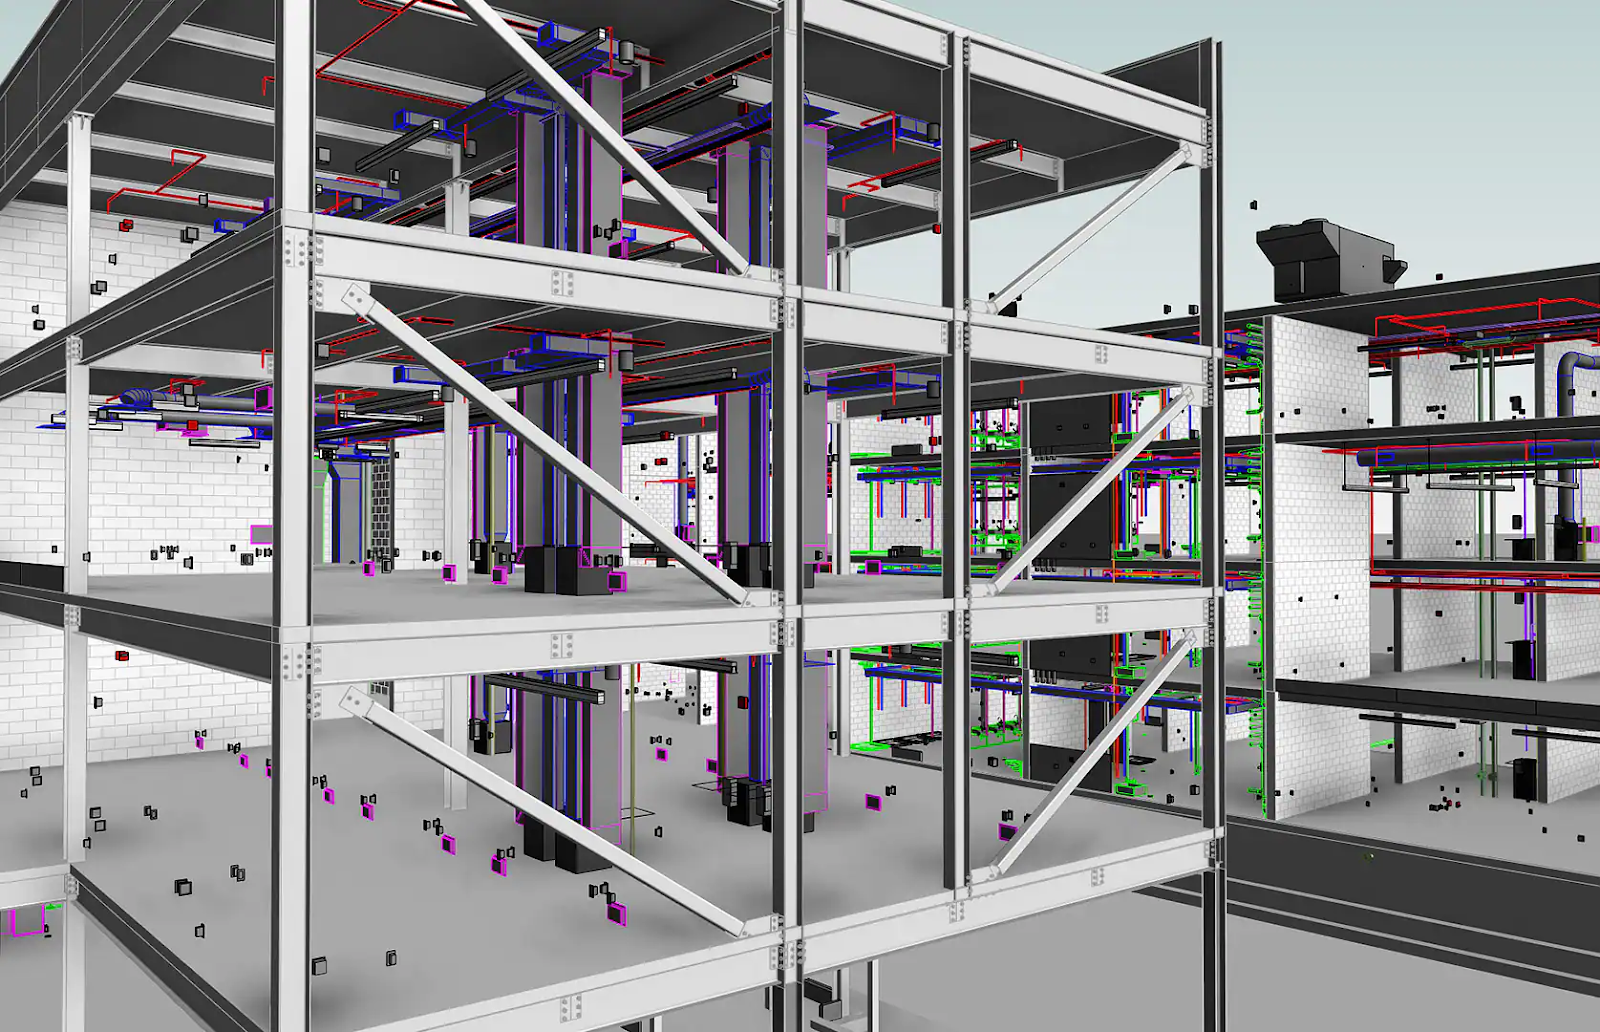 a structural analysis represented on Revit software